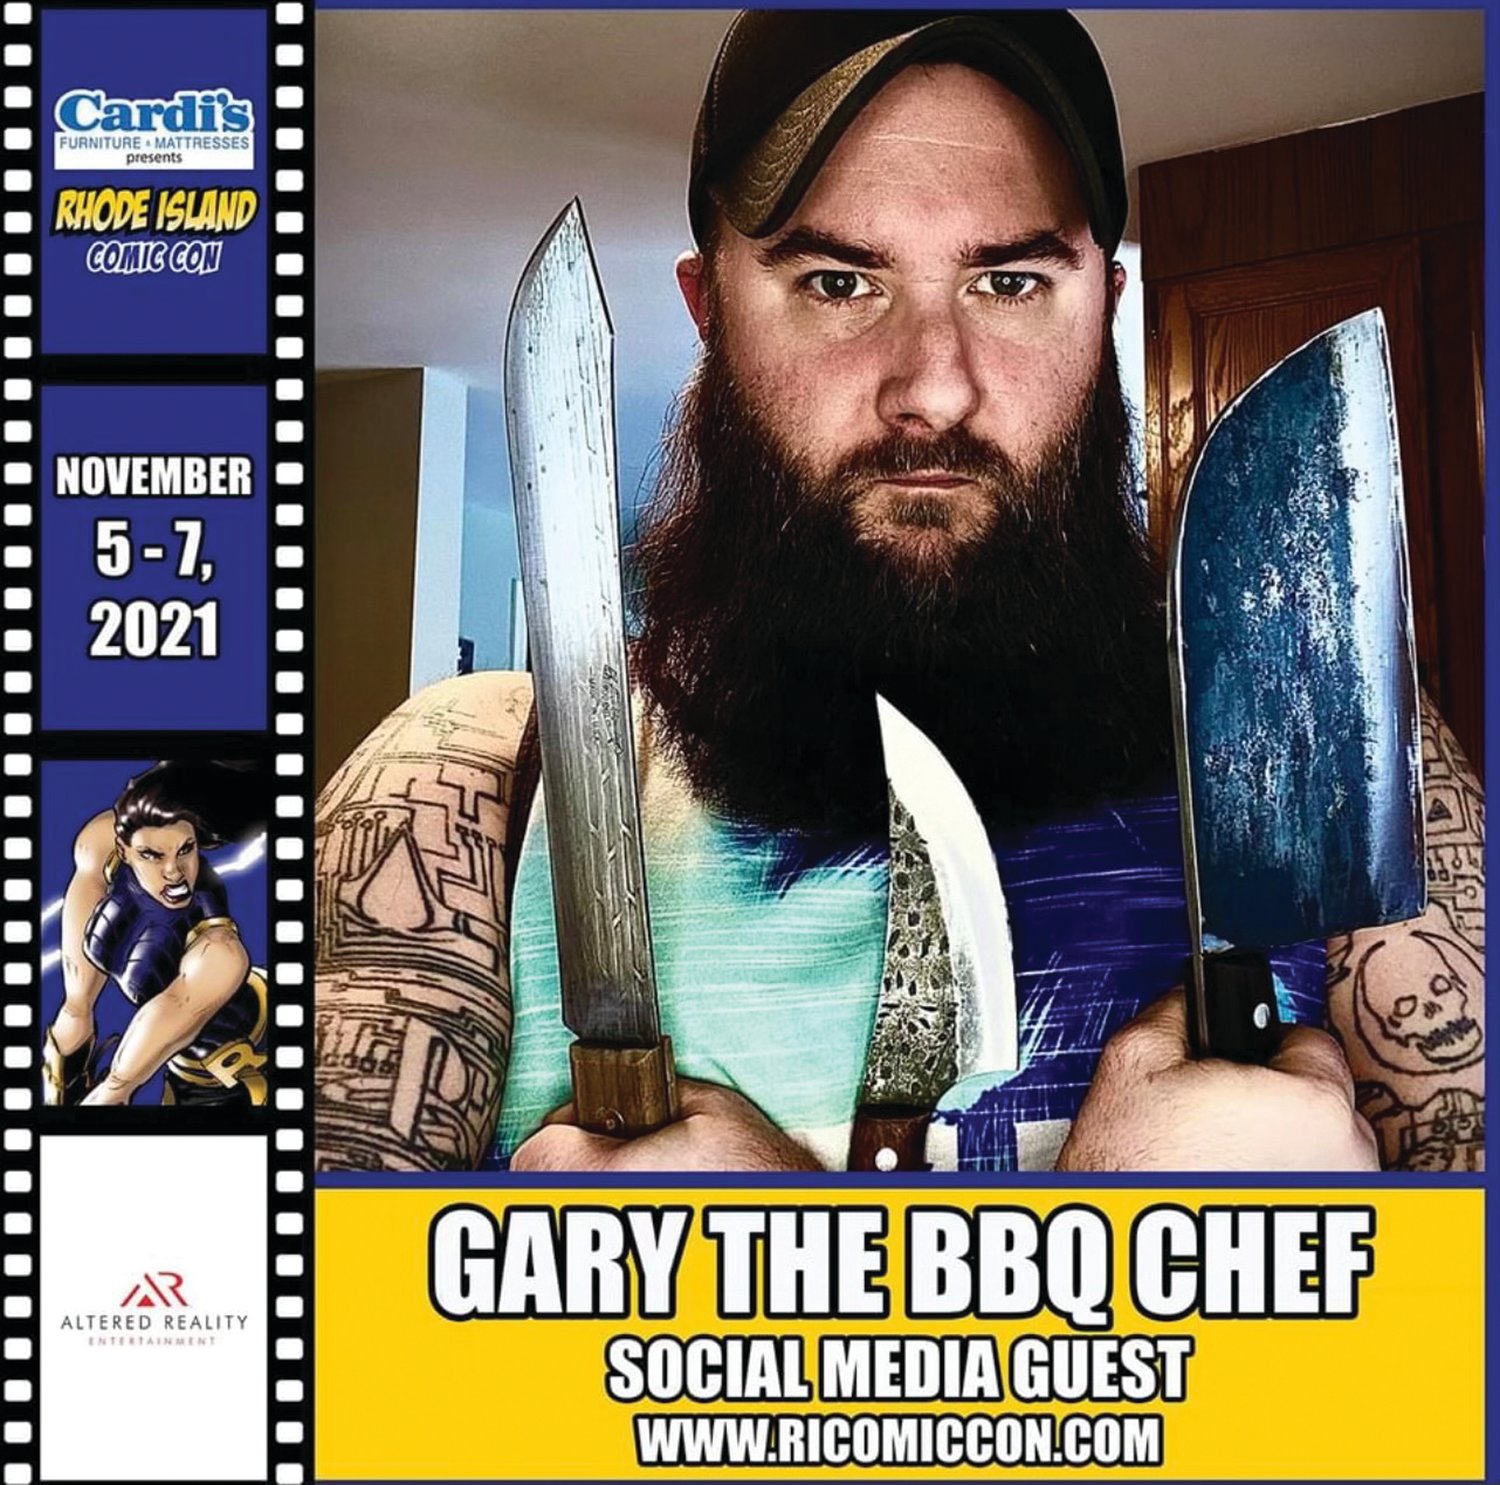 SNACK ON THIS: Gary Marandola gained 1.6 million TikTok followers for his BBQ chef videos and will appear on Fox’s new show “Next Level Chef.”